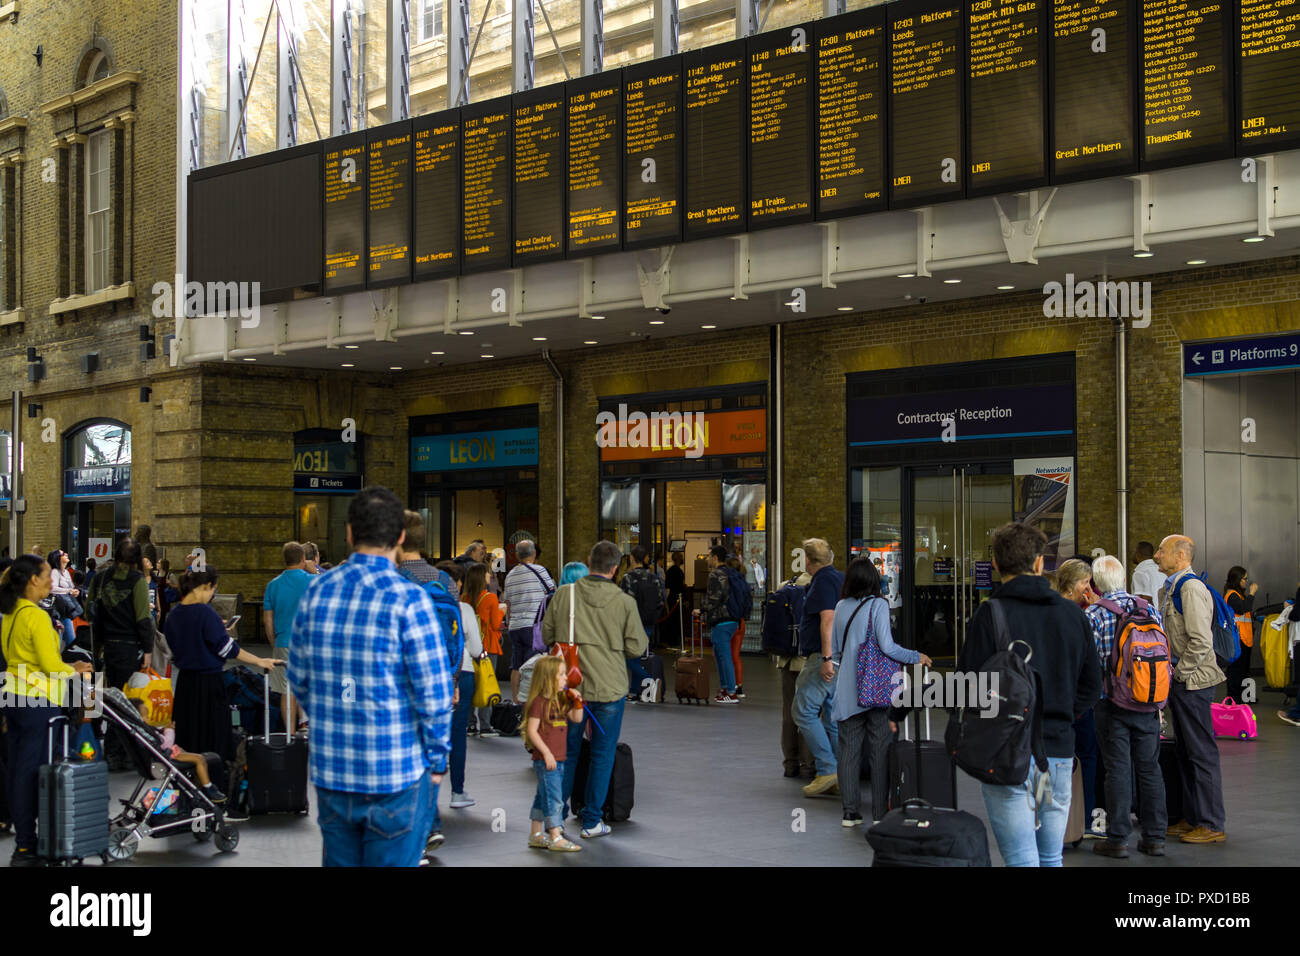 Commuters standing looking at the main electronic train noticeboards in the concourse of King's Cross station, London, UK Stock Photo